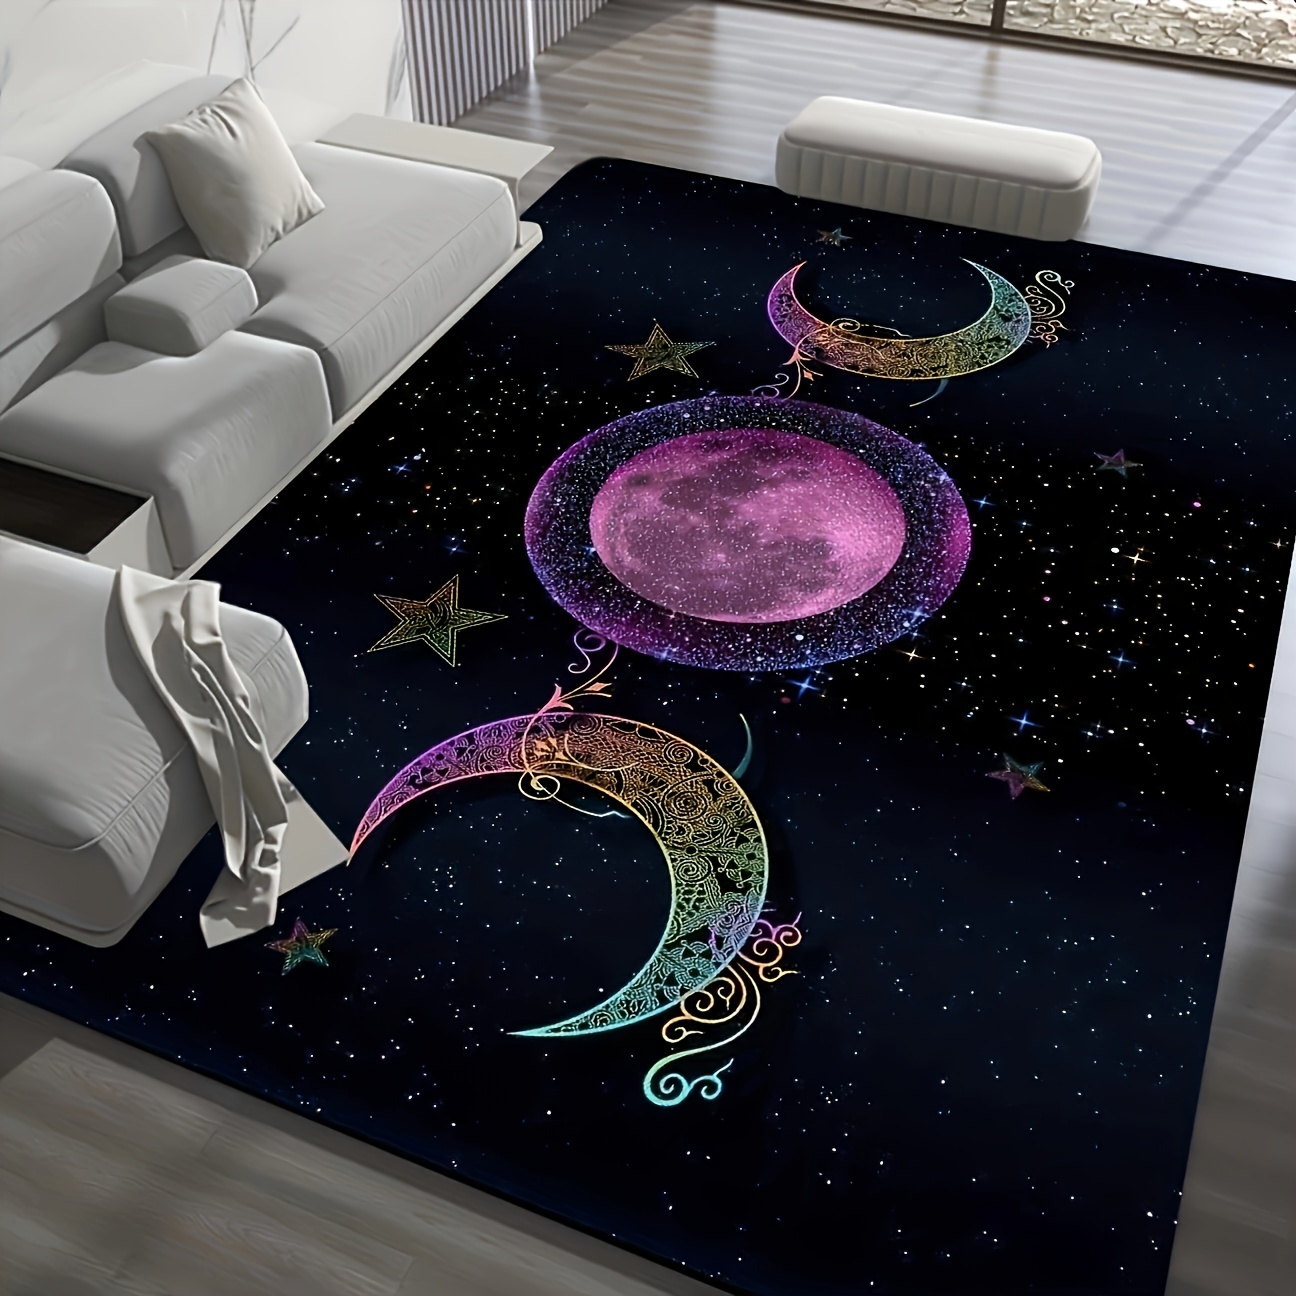 Logieut Moon Phase Kitchen Rug Set of 2, Goth Rug, Moon Rug, Black and White Constellation Halloween Kitchen Mat Rugs, Carpet- Gothic Witchy Moon Phase